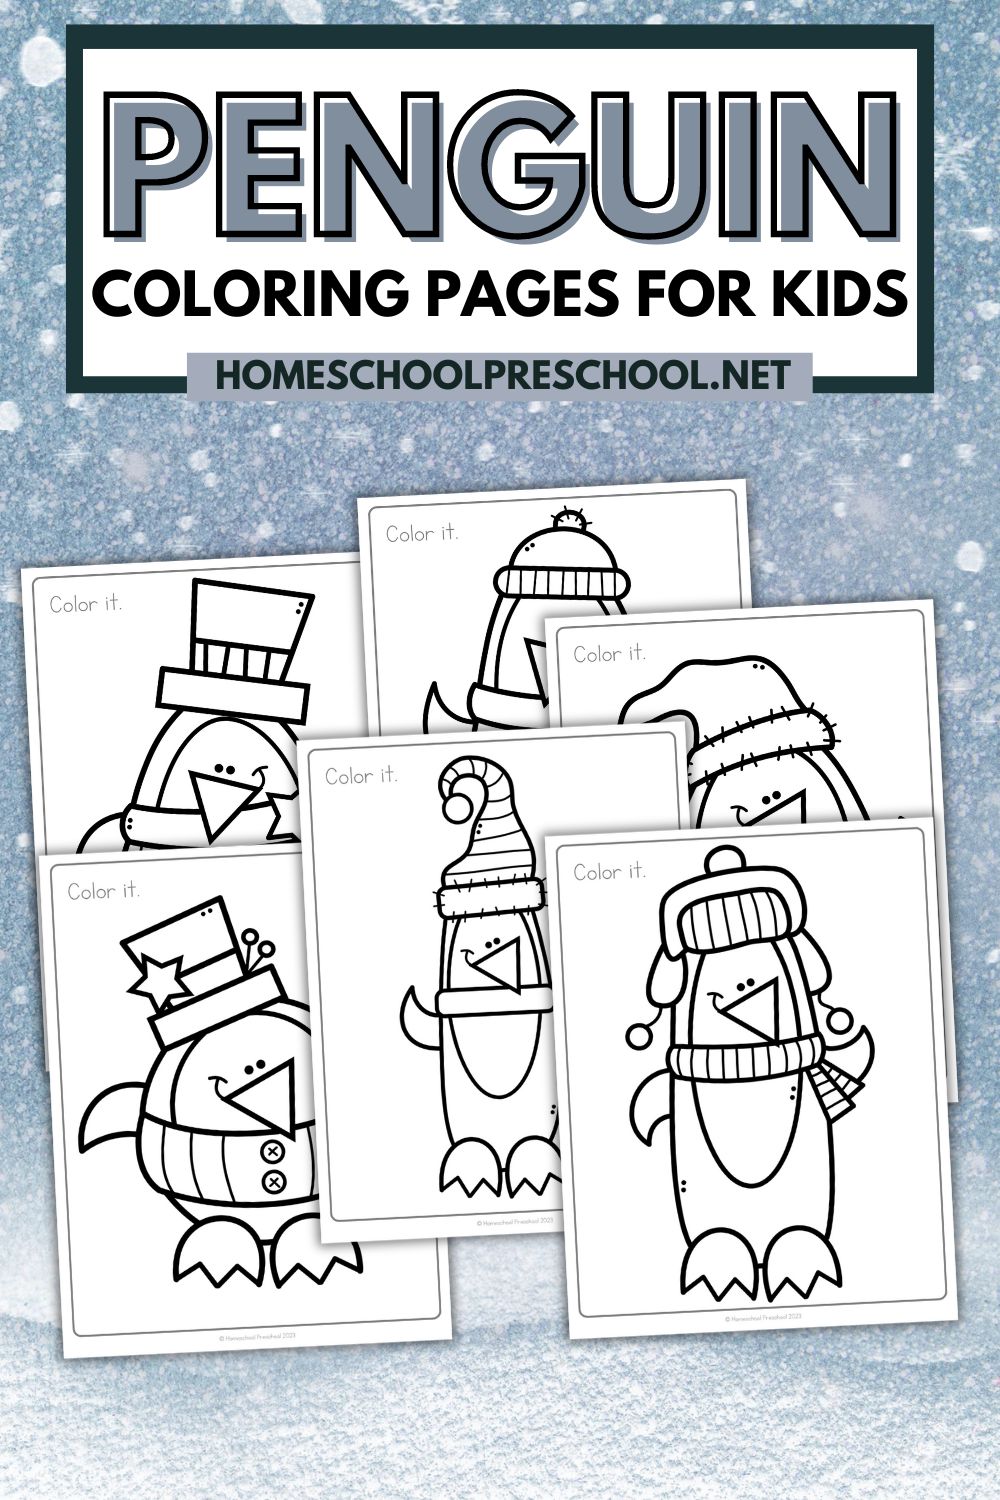 capital-penguin Winter Penguin Coloring Pages